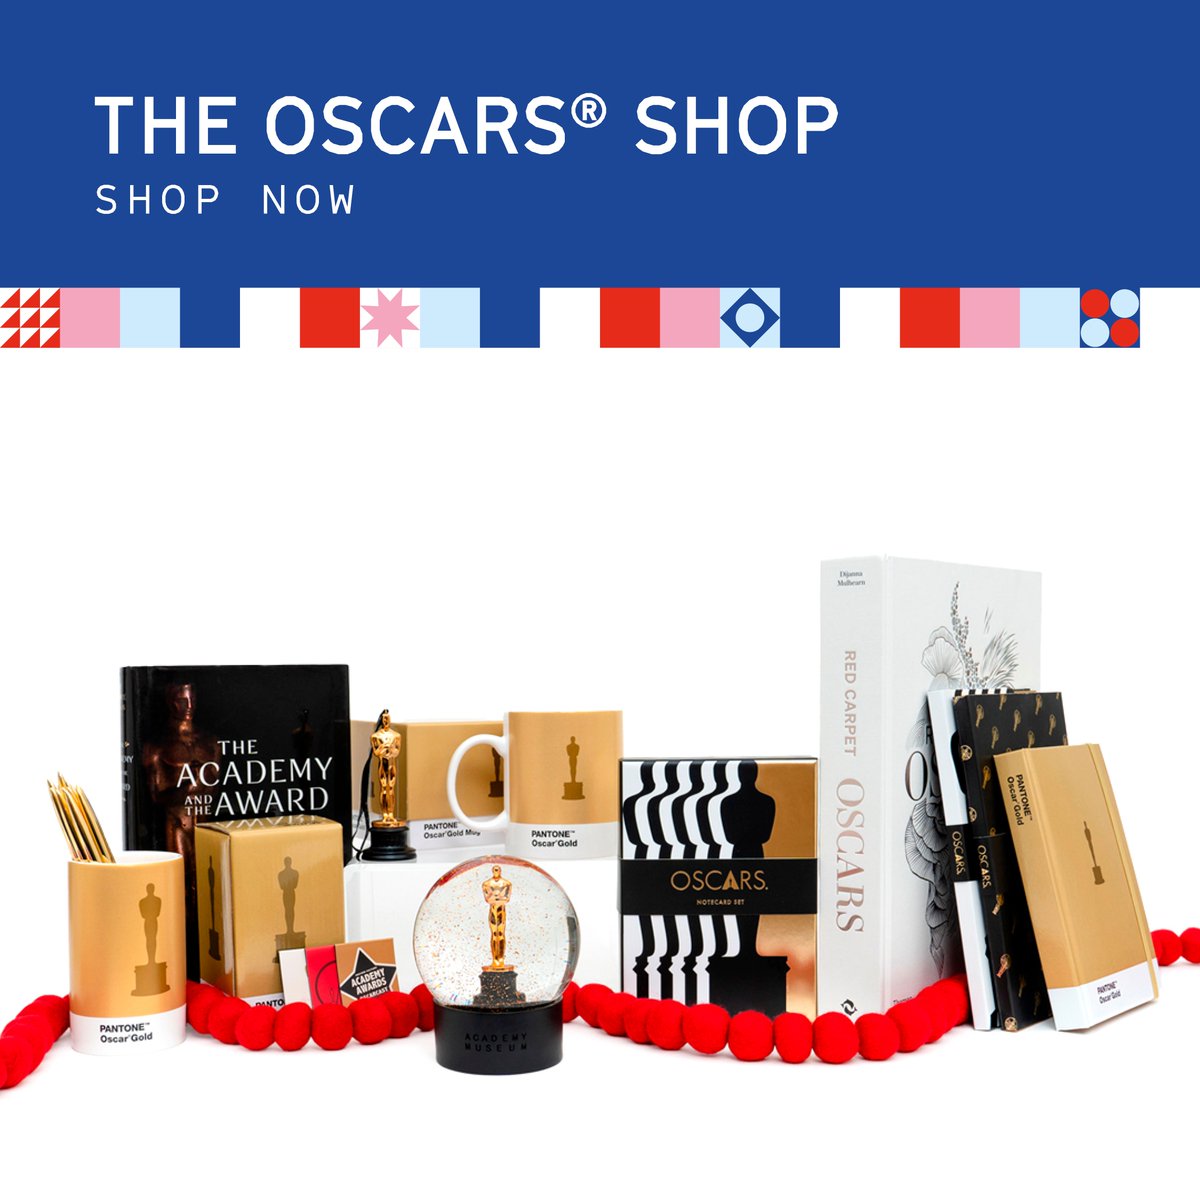 New Arrivals: The Oscars Shop Shop our collection of Oscars-inspired gifts for all ages and interests. Introducing our collection of die-cut stationery, ceramic accessory trays, and our new exclusive Oscar statuette collectible holiday ornament. Shop: acadmu.se/3xnxVrY